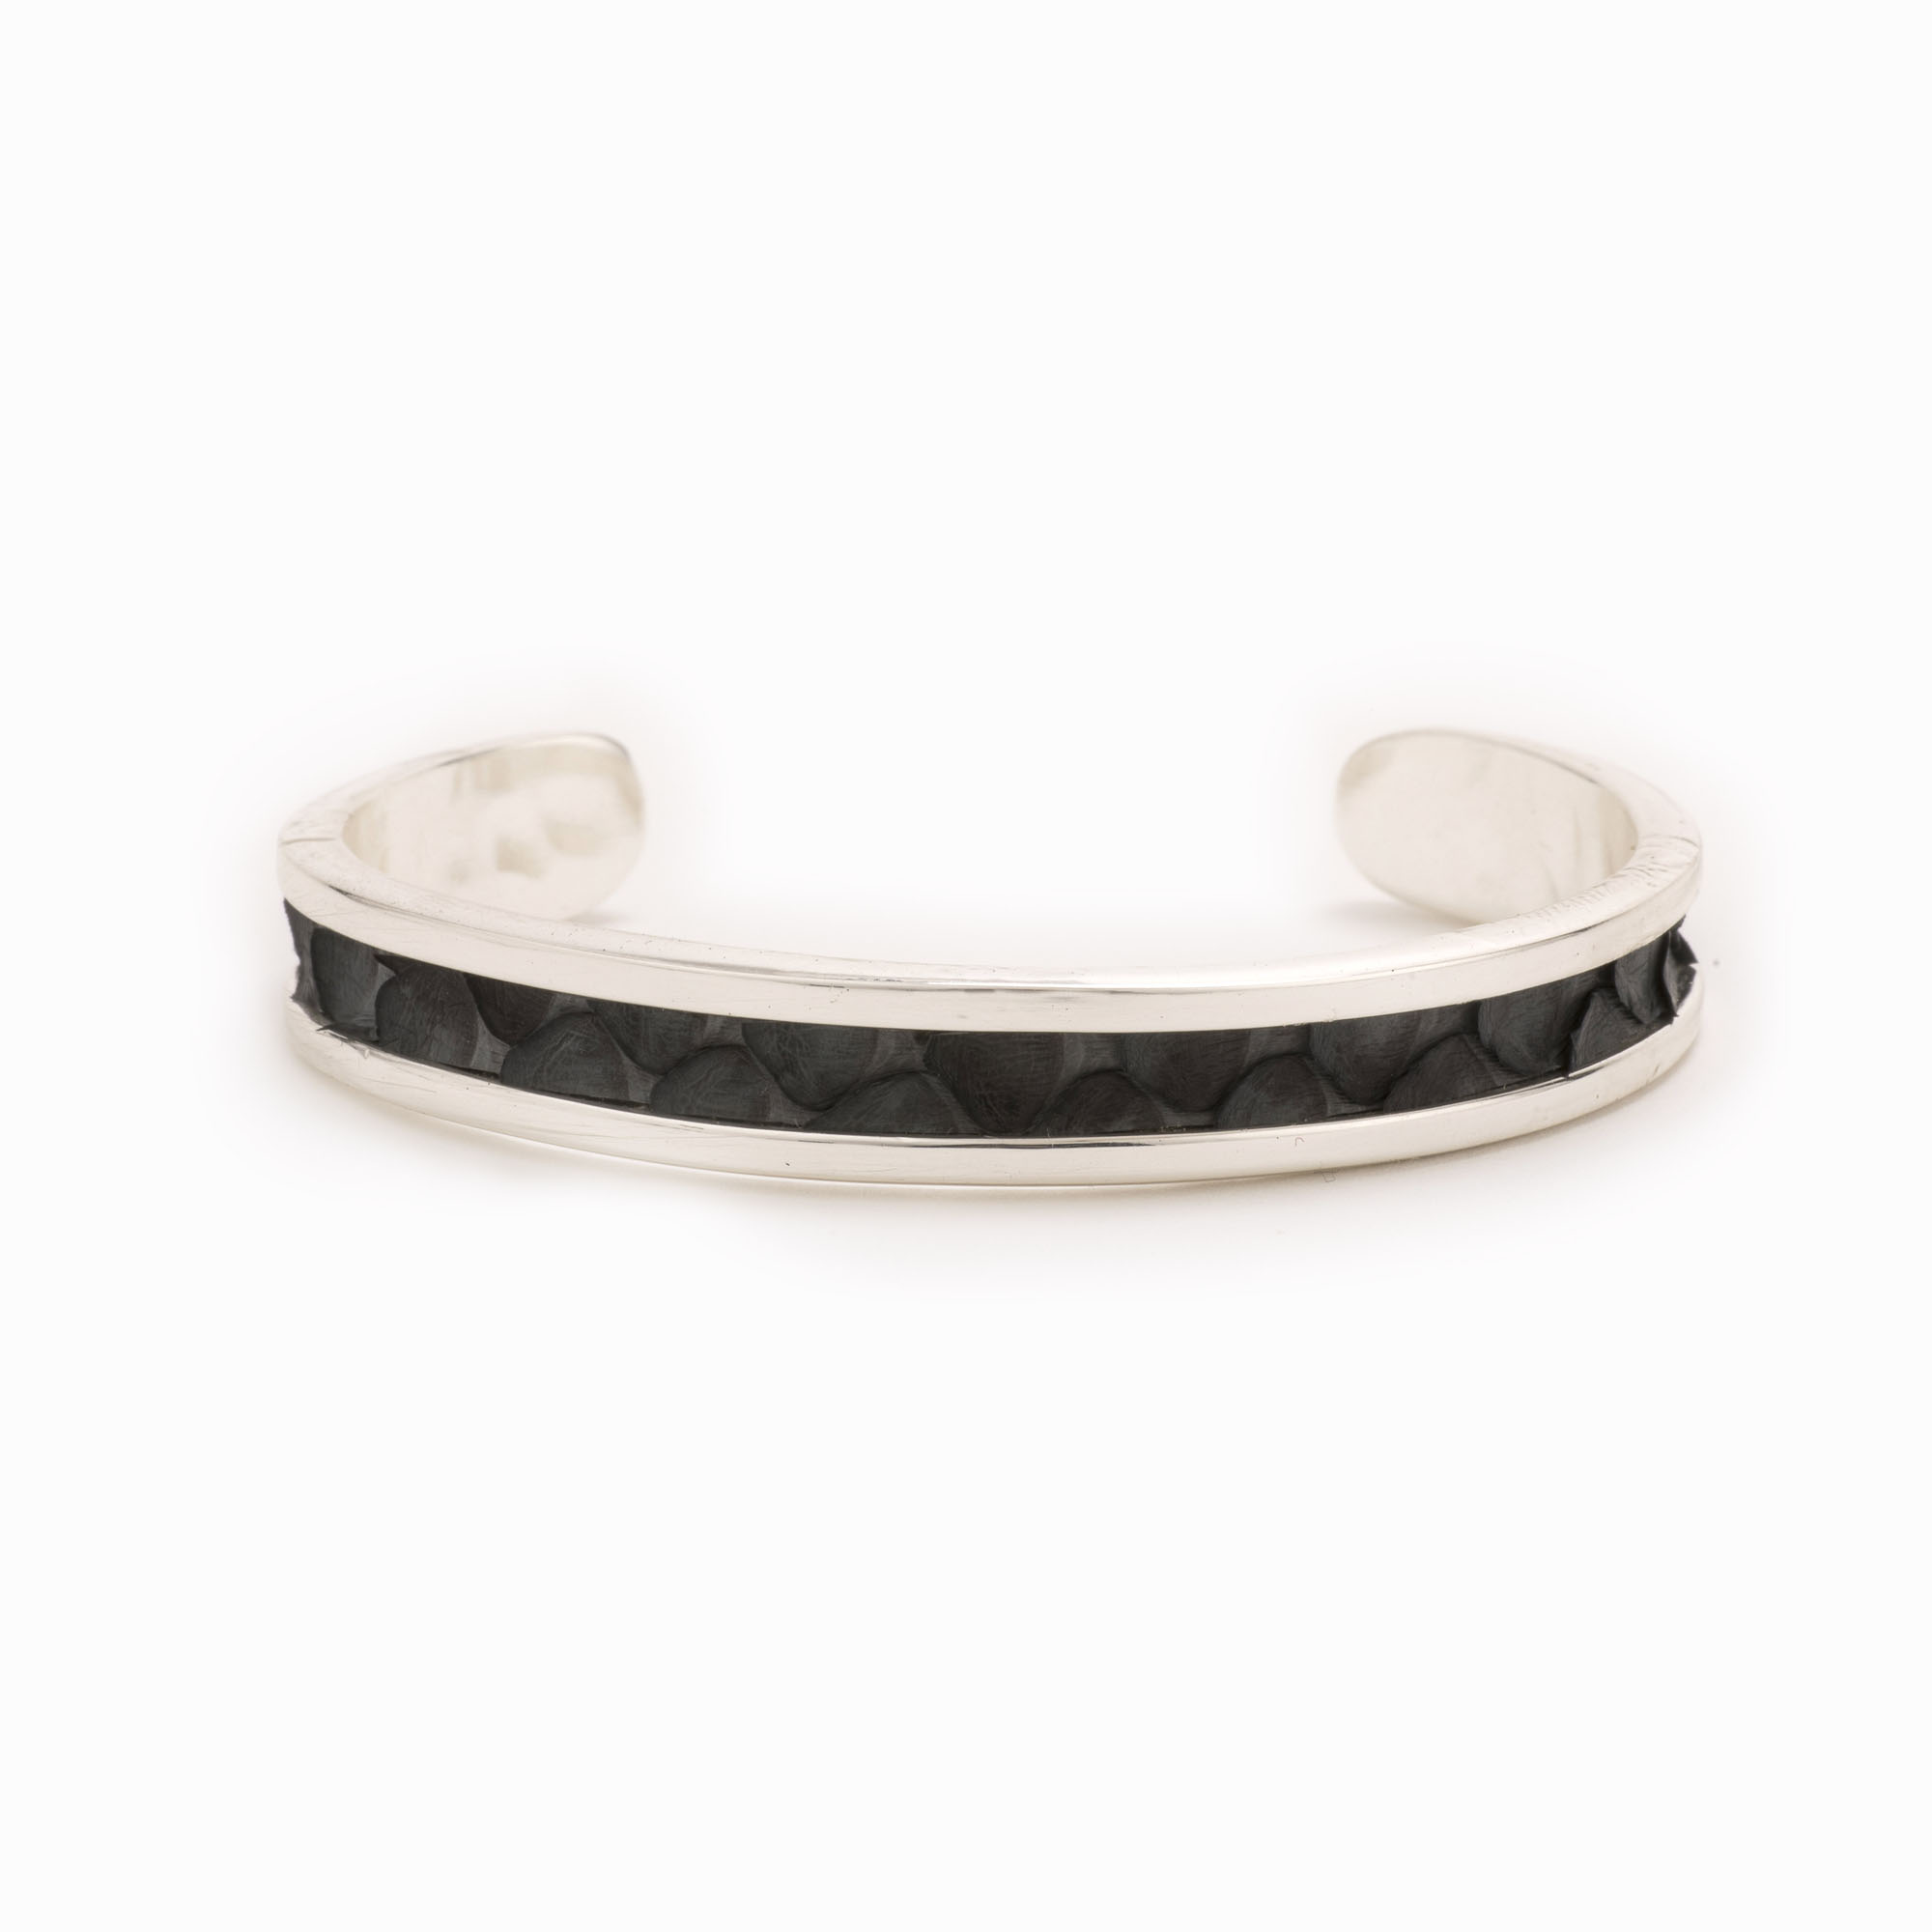 Featured image for “Small Charcoal Silver Cuff”